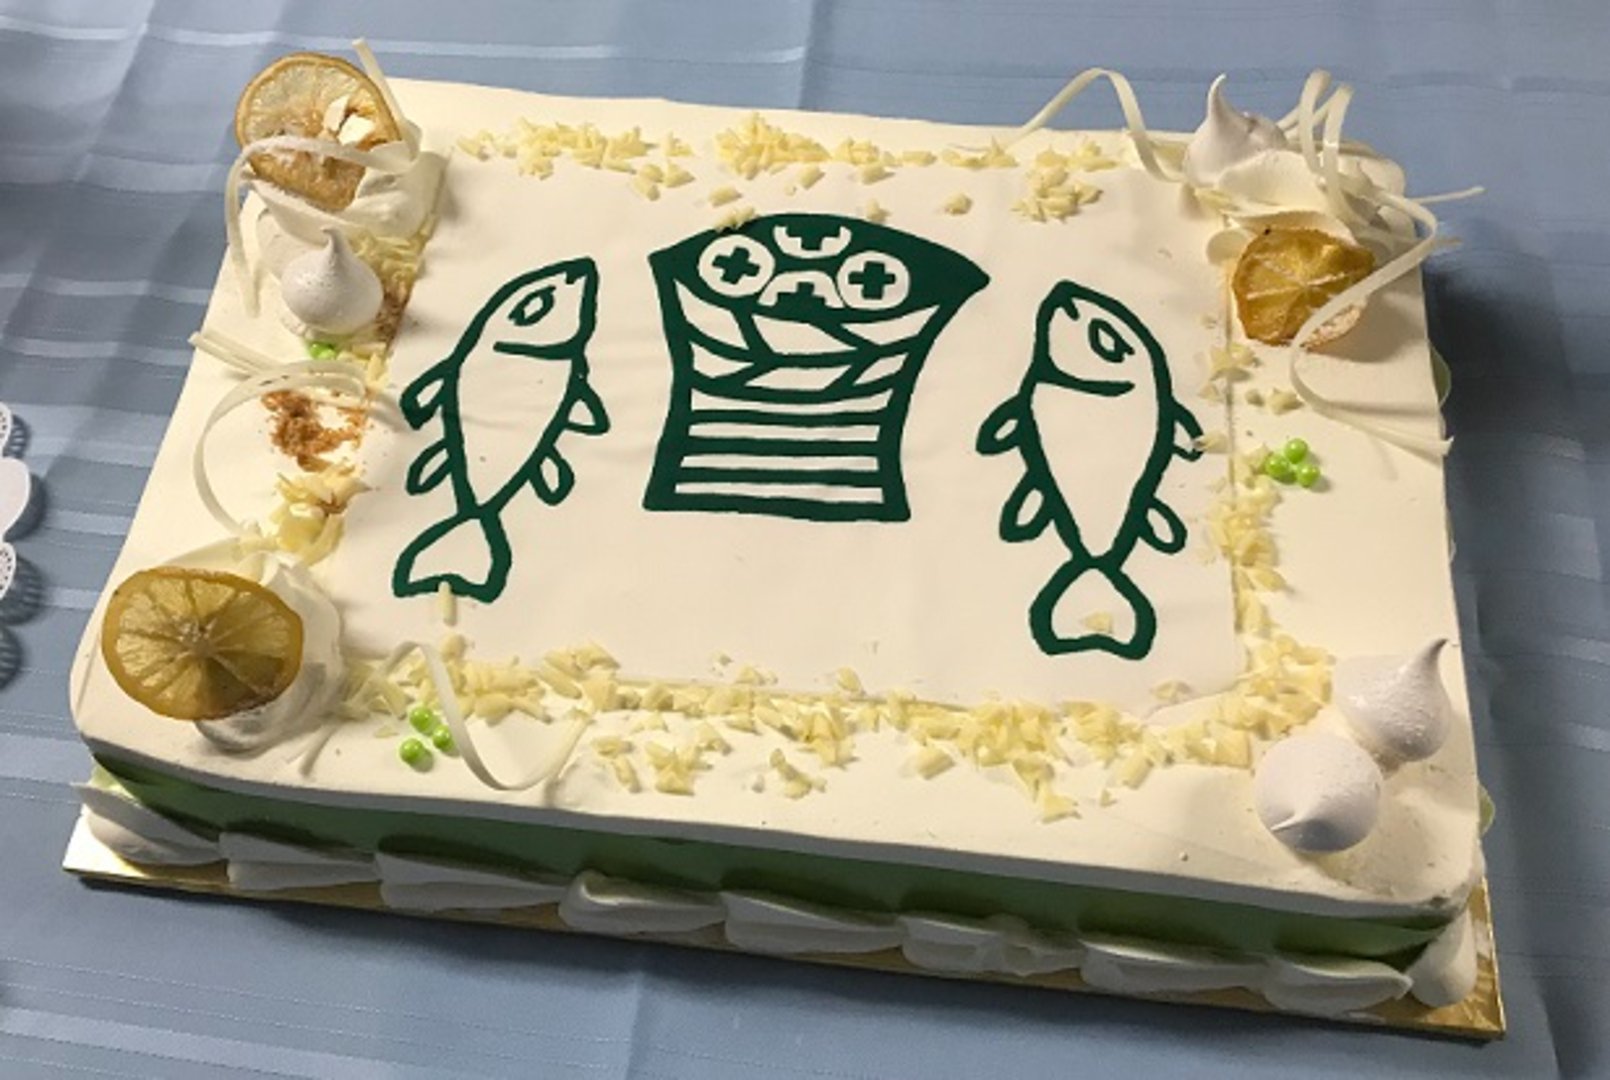 Specially made Loaves and Fishes cake